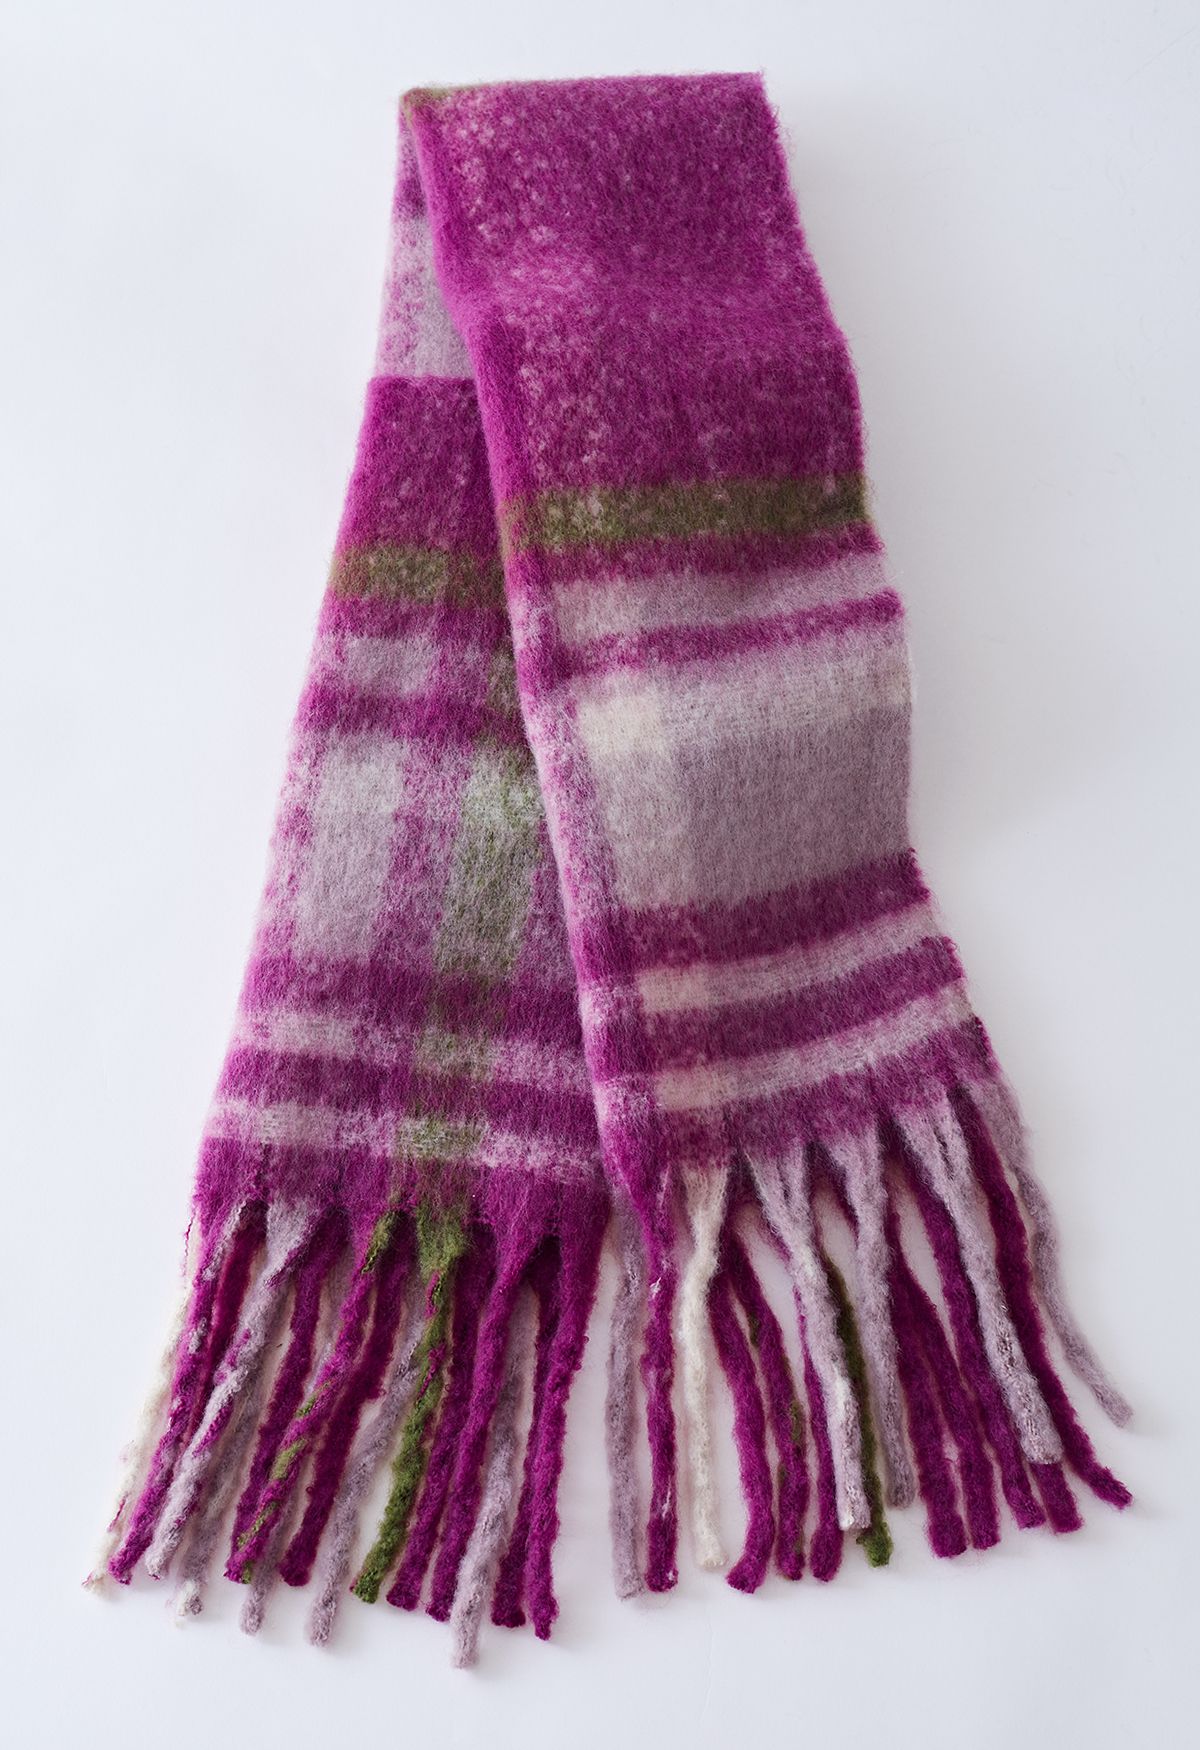 Fuzzy Mohair Plaid Pattern Scarf in Plum